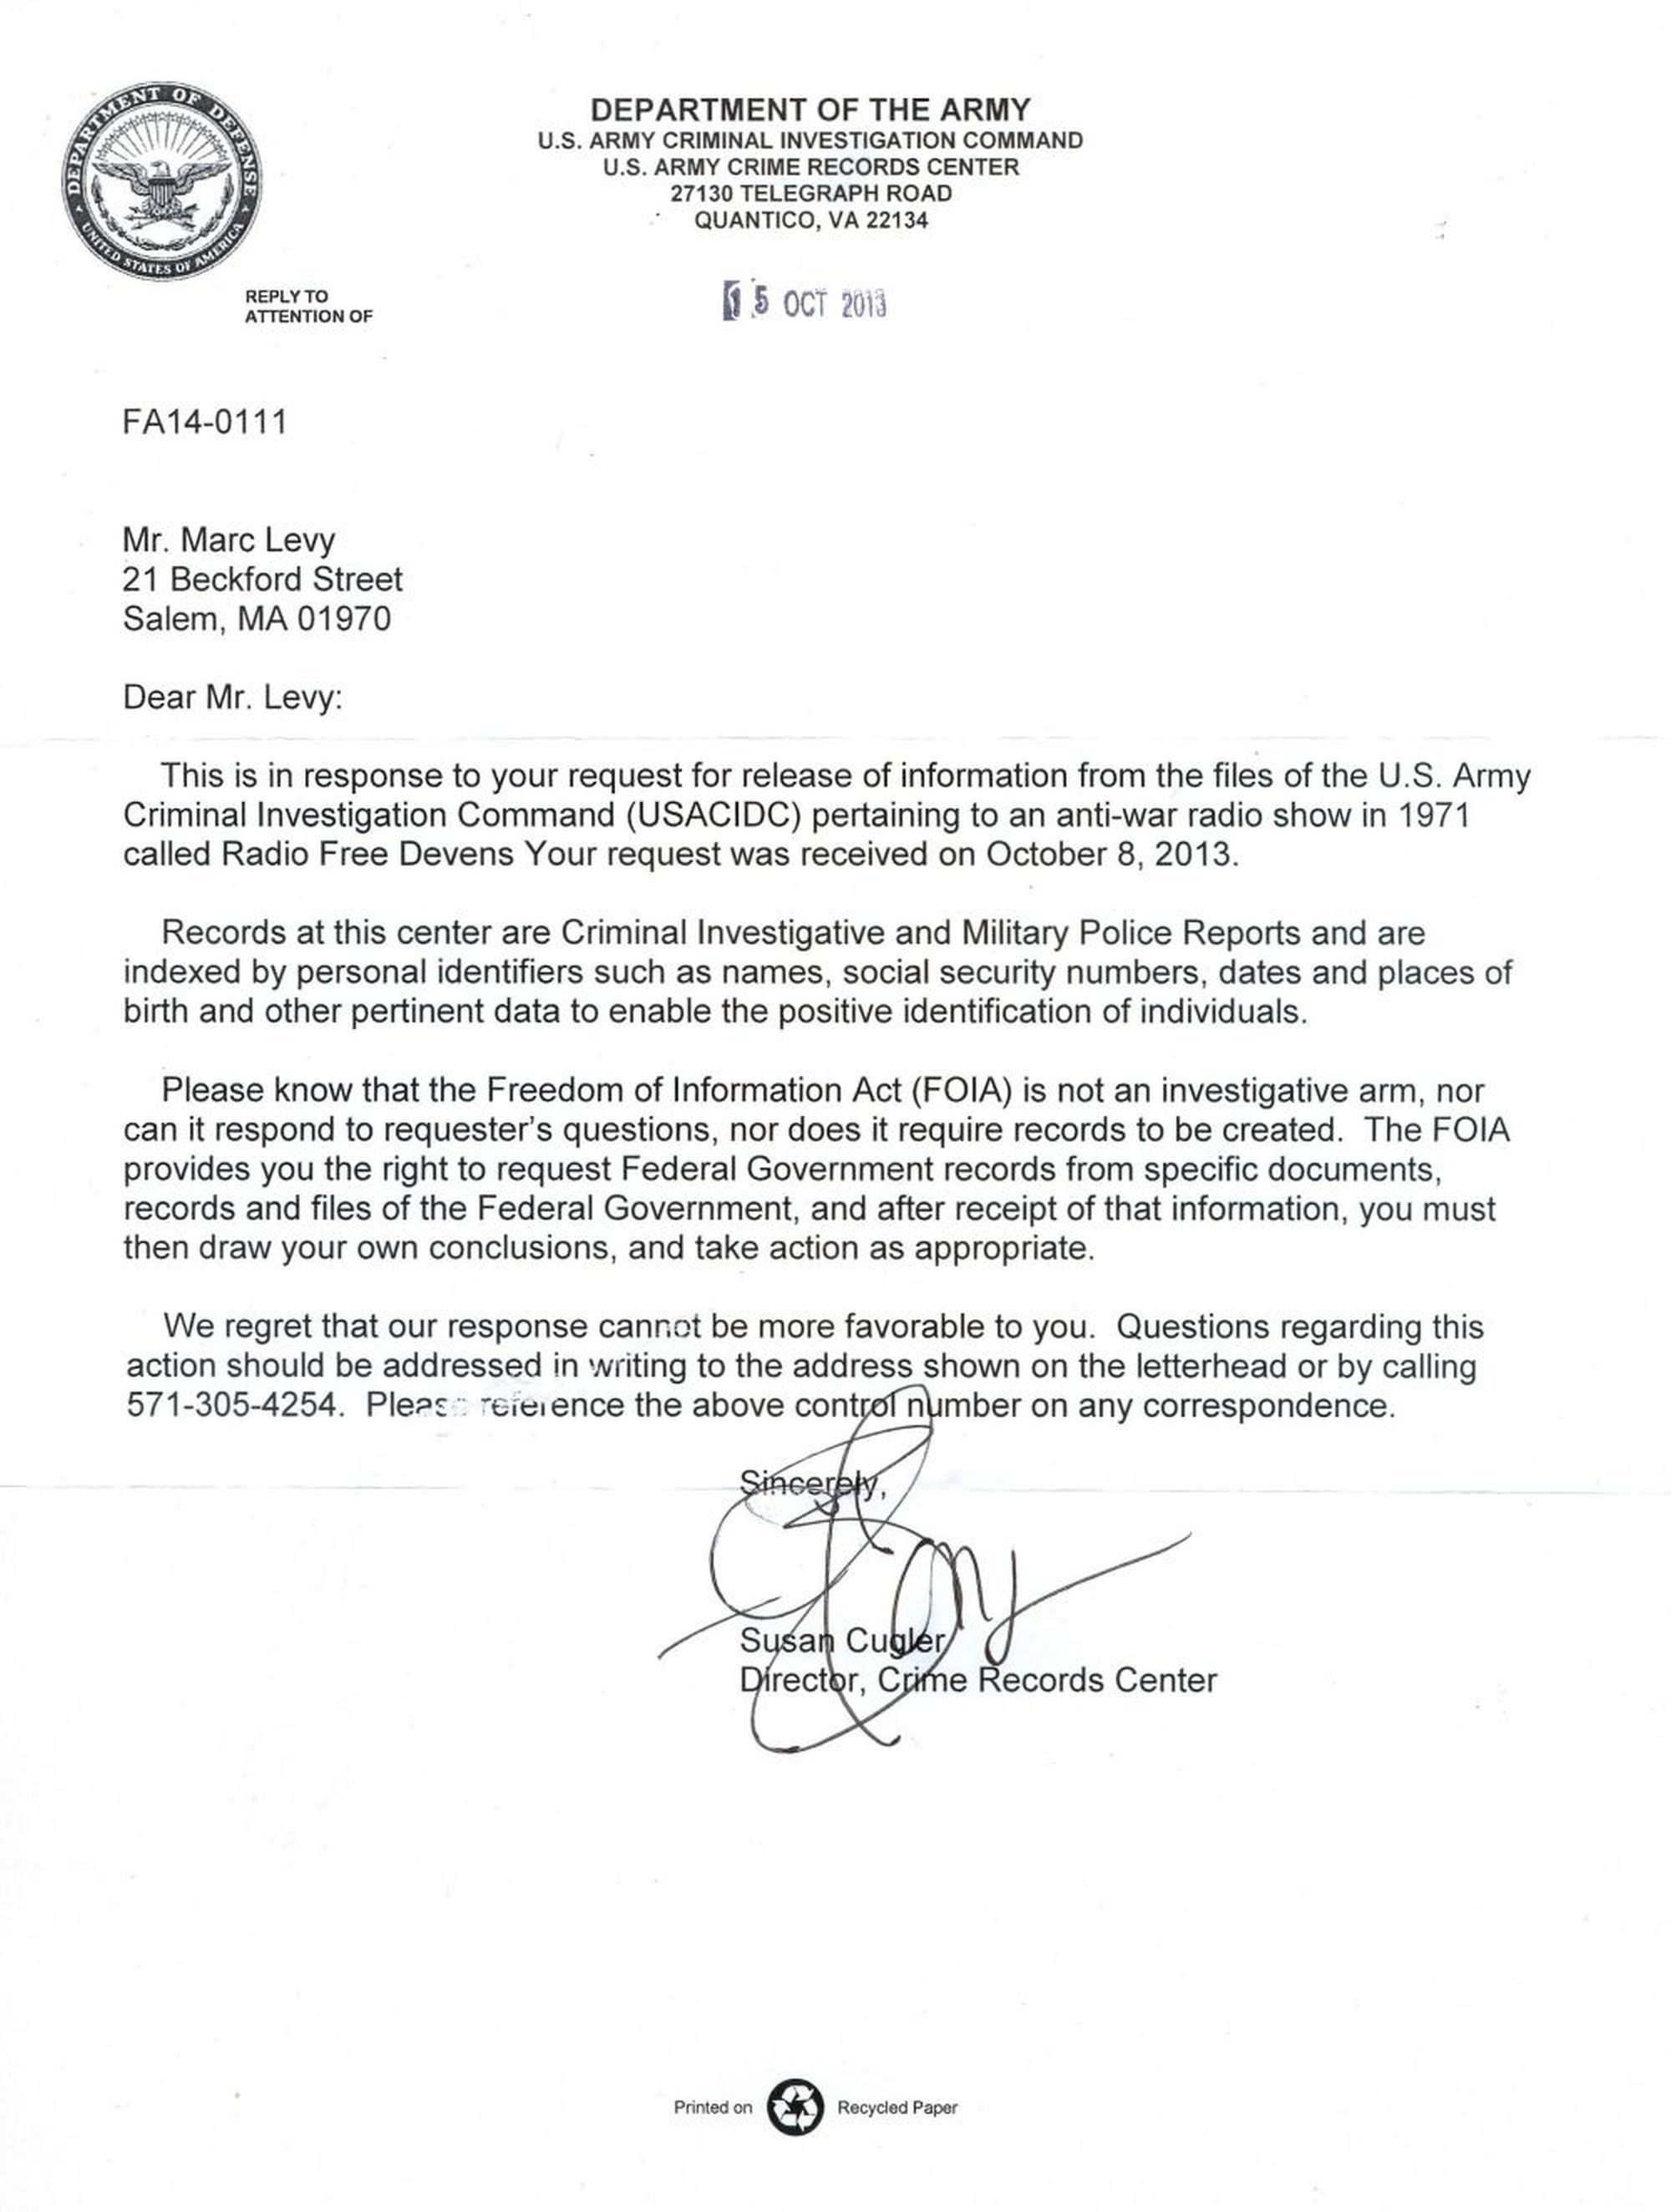 Army CIC letter 2013 in response to FOIA request.